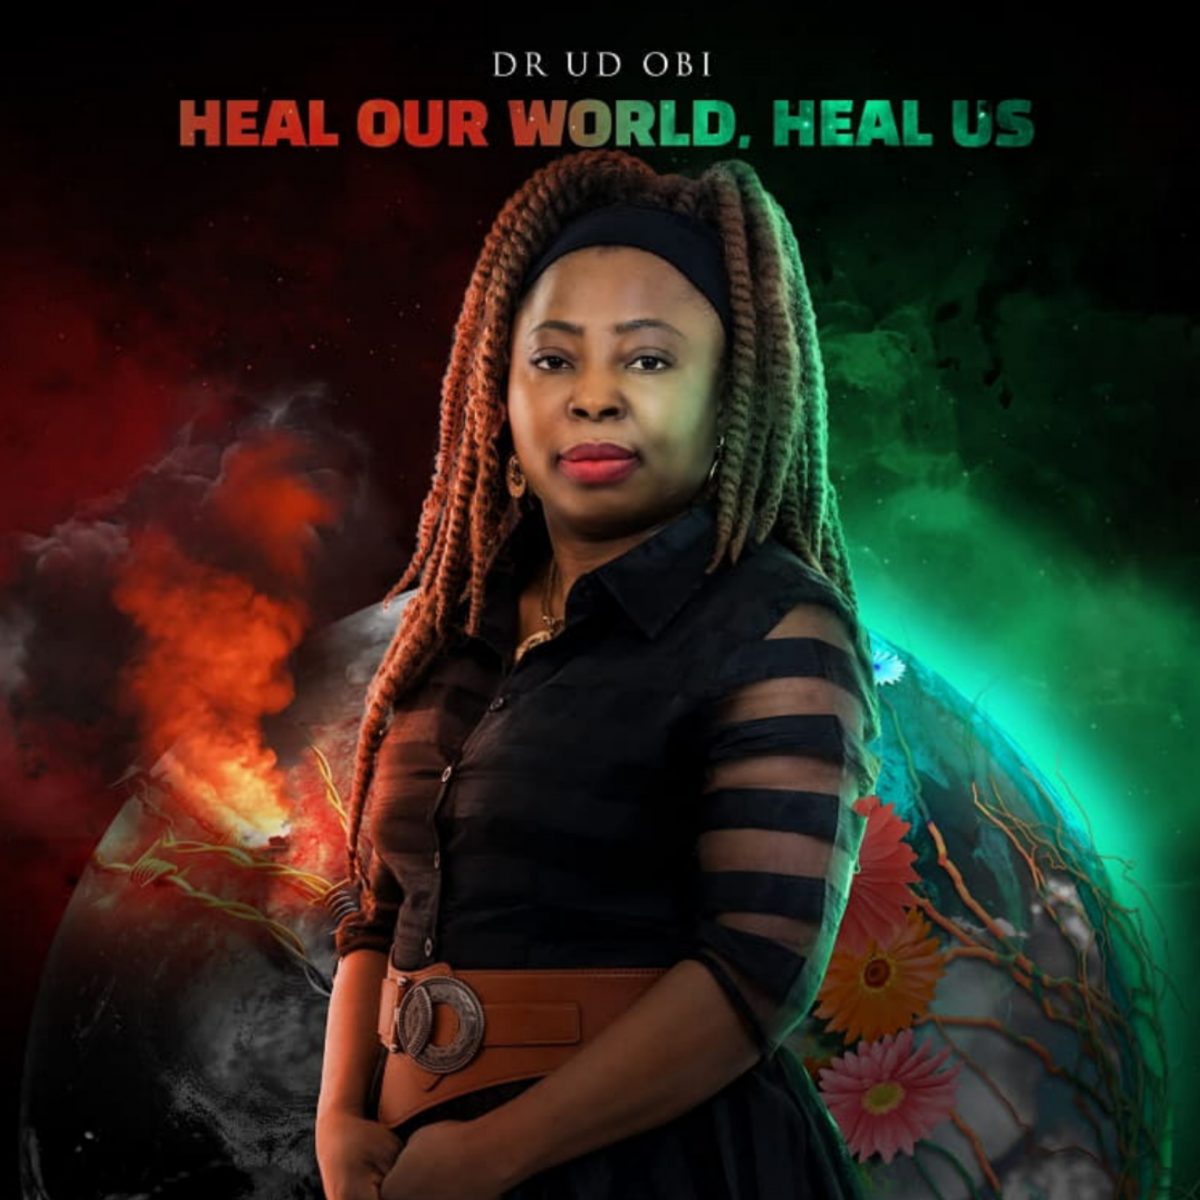 Heal our World By Dr. Udi Obi